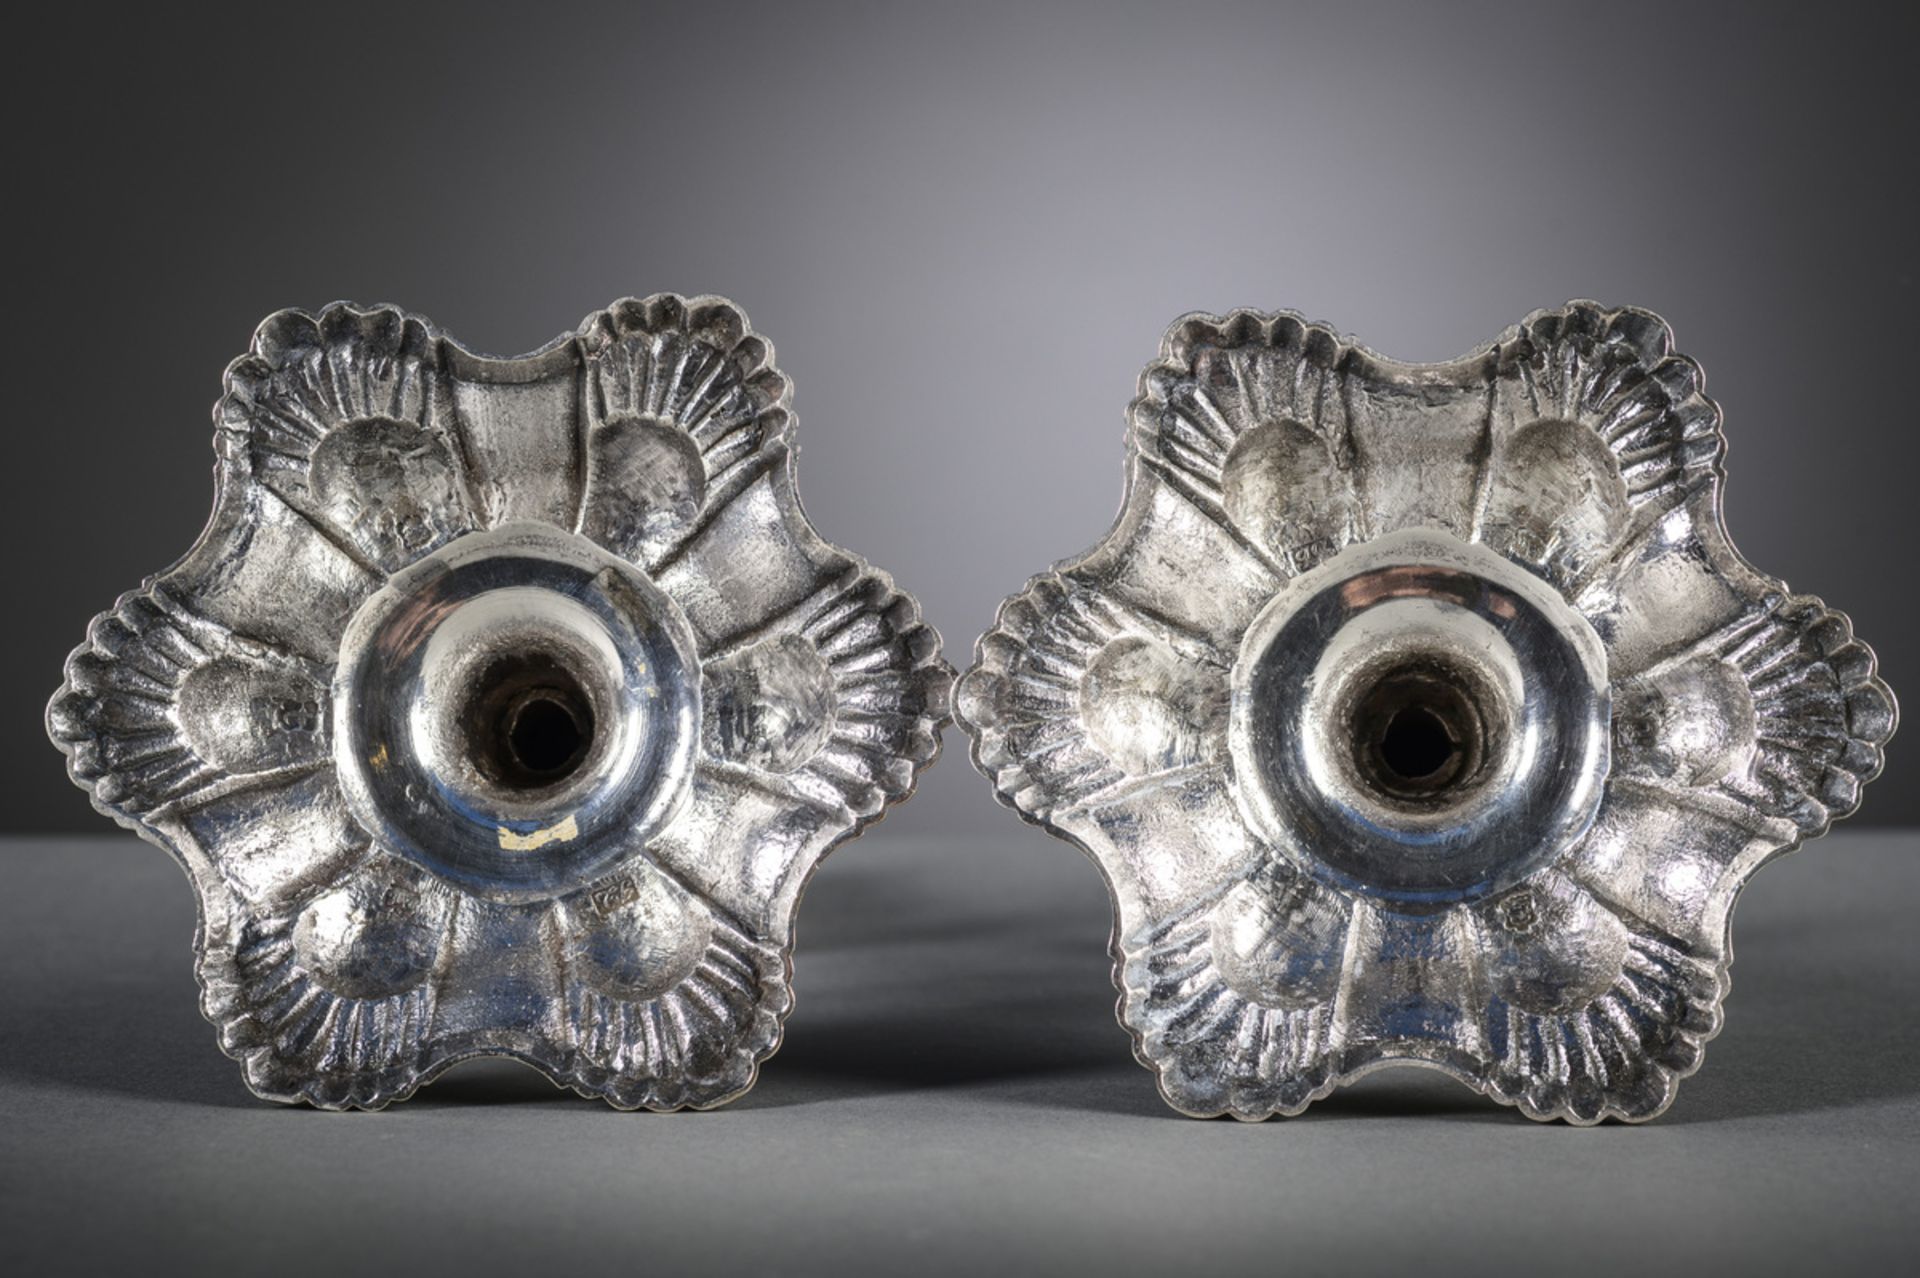 A pair of English silver candlesticks by Lampfert London, 18th century (h22cm) - Image 4 of 5